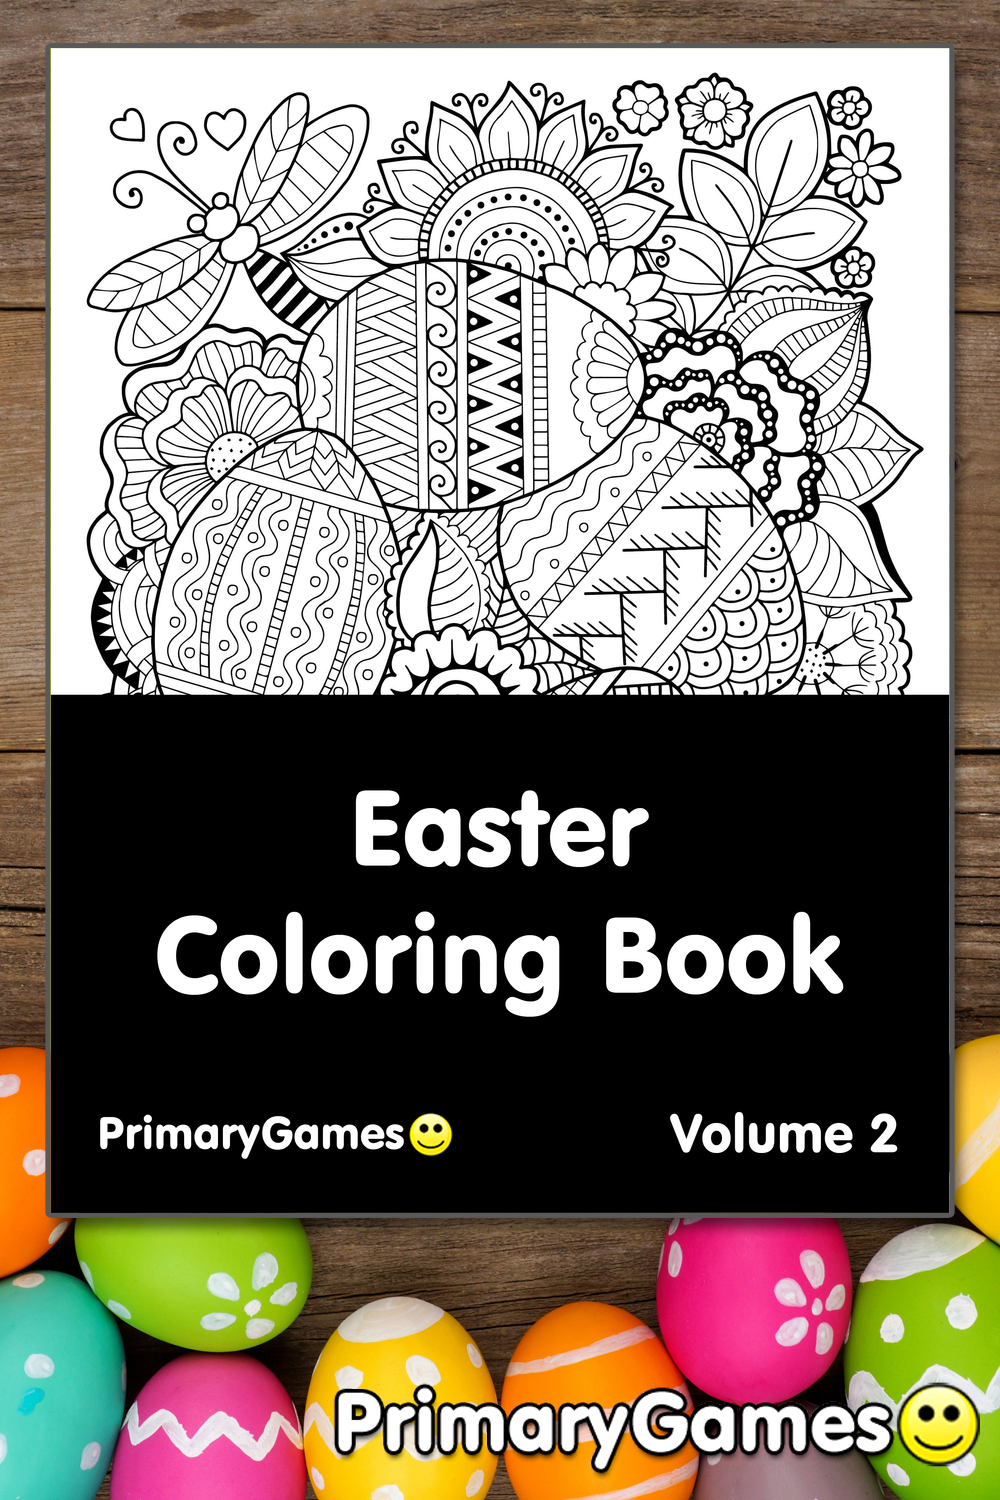 Easter Coloring eBook Volume 2 • FREE Printable PDF from ...